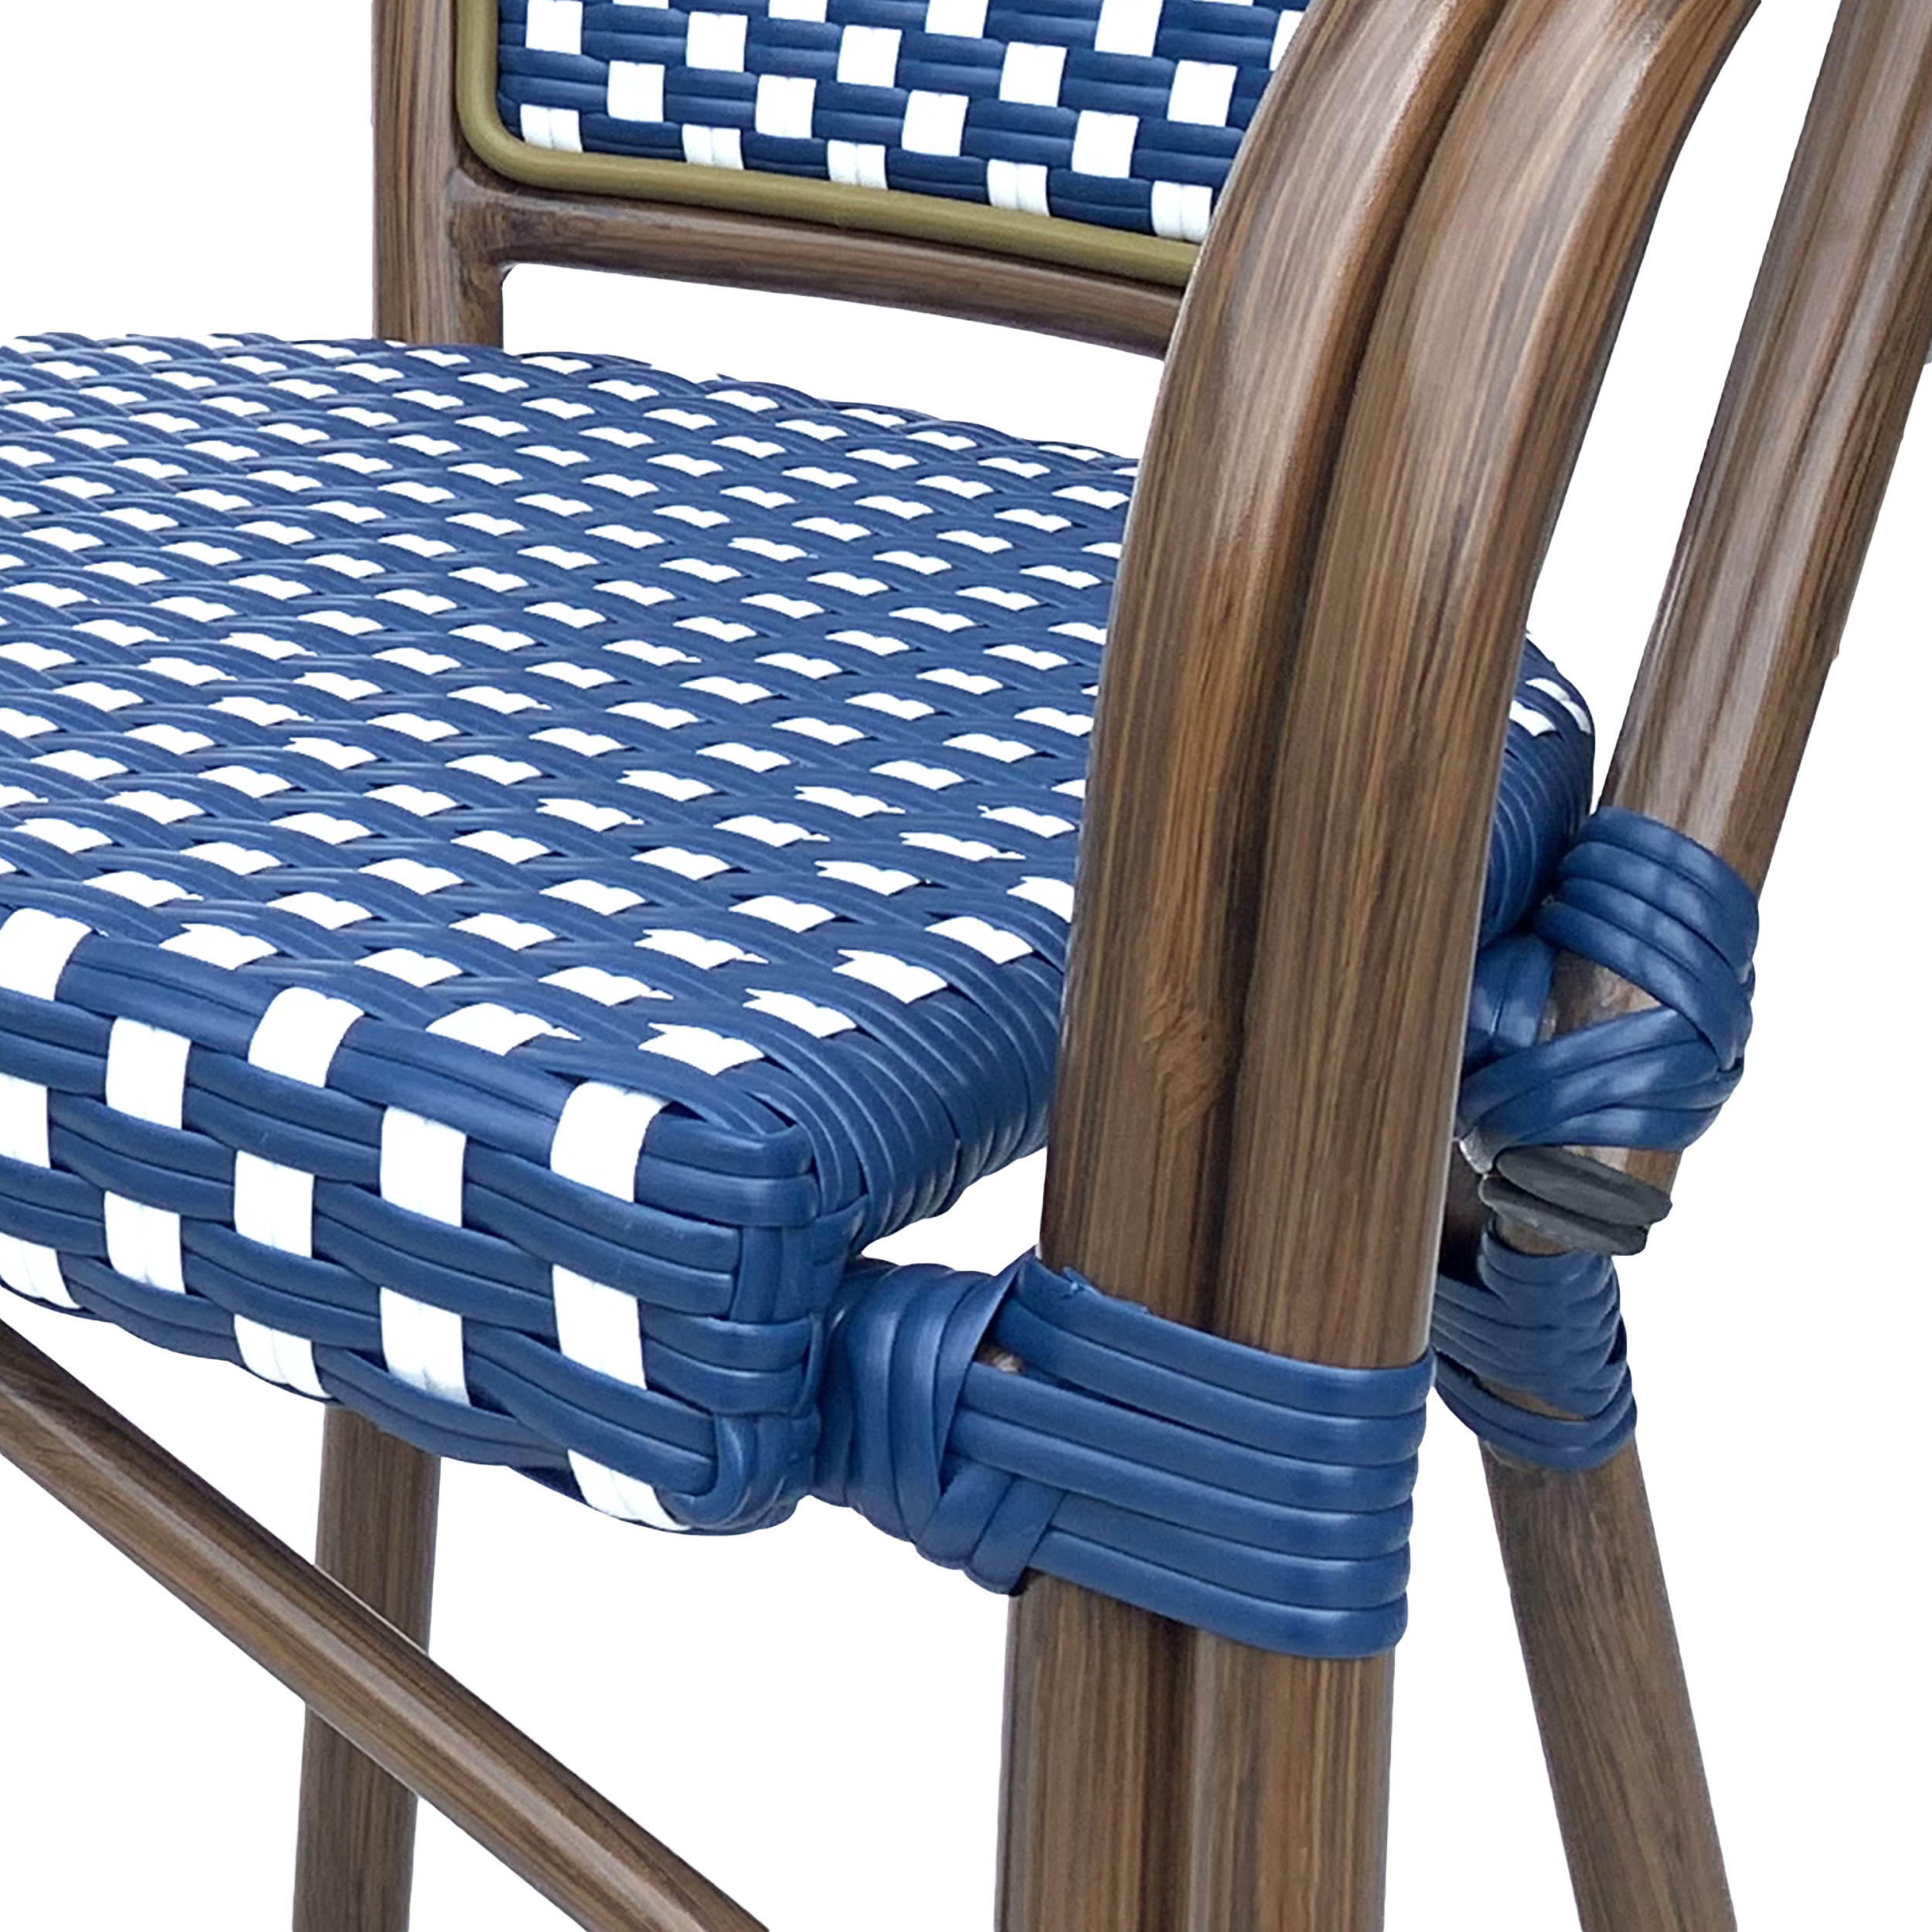 Cecil Aluminum and Wicker Outdoor French Bistro Chairs, Set of 4, Navy Blue, White, and Brown Wood - image 5 of 7